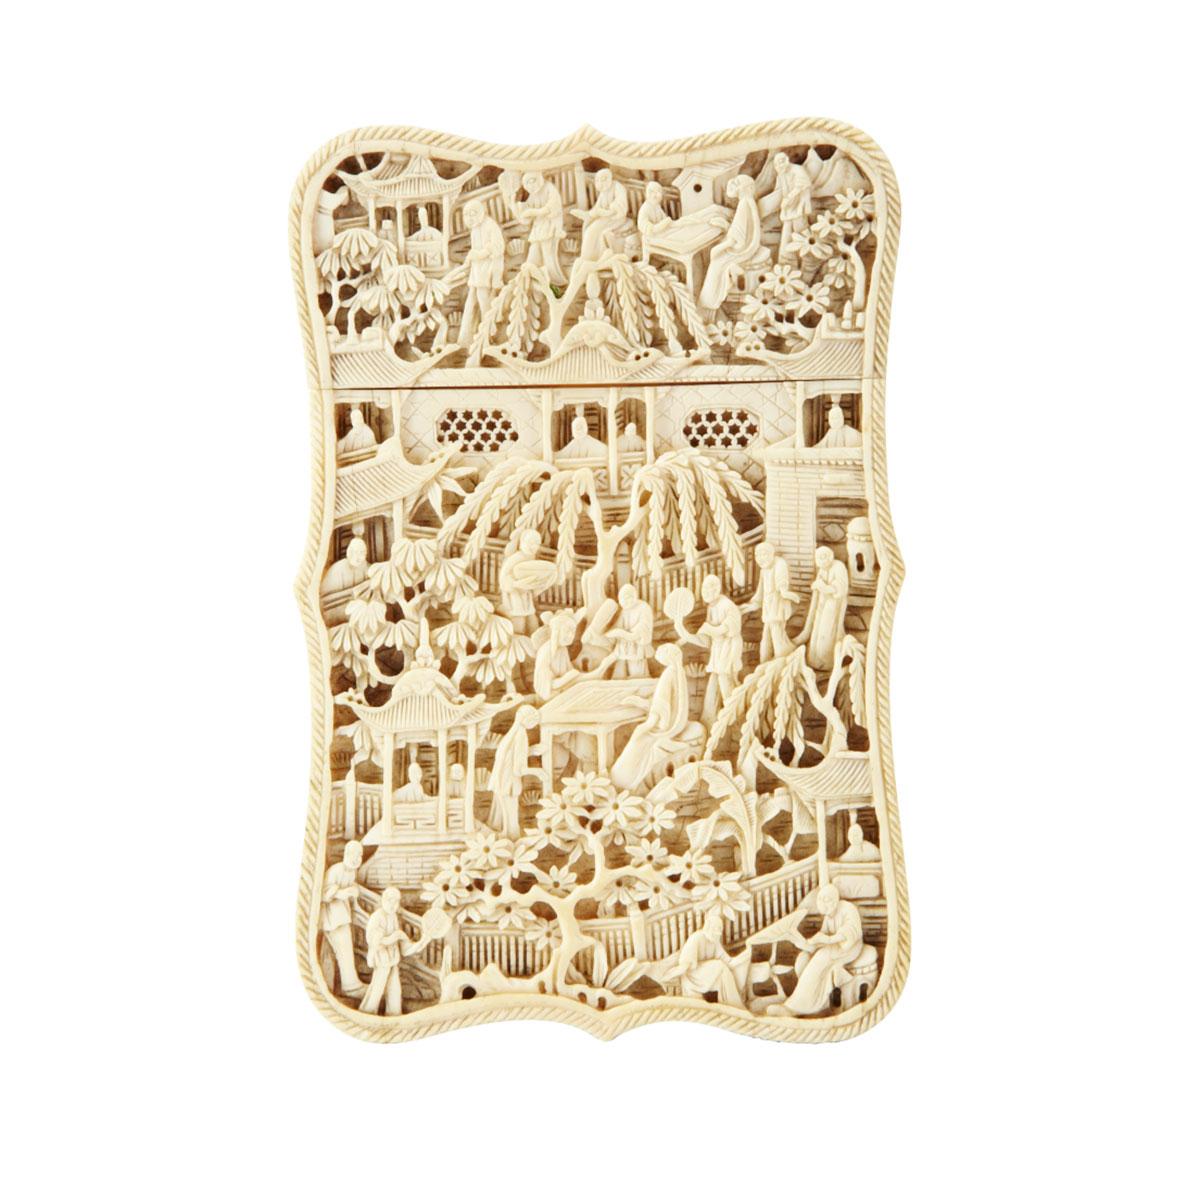 Export Ivory Card Case, 19th Century